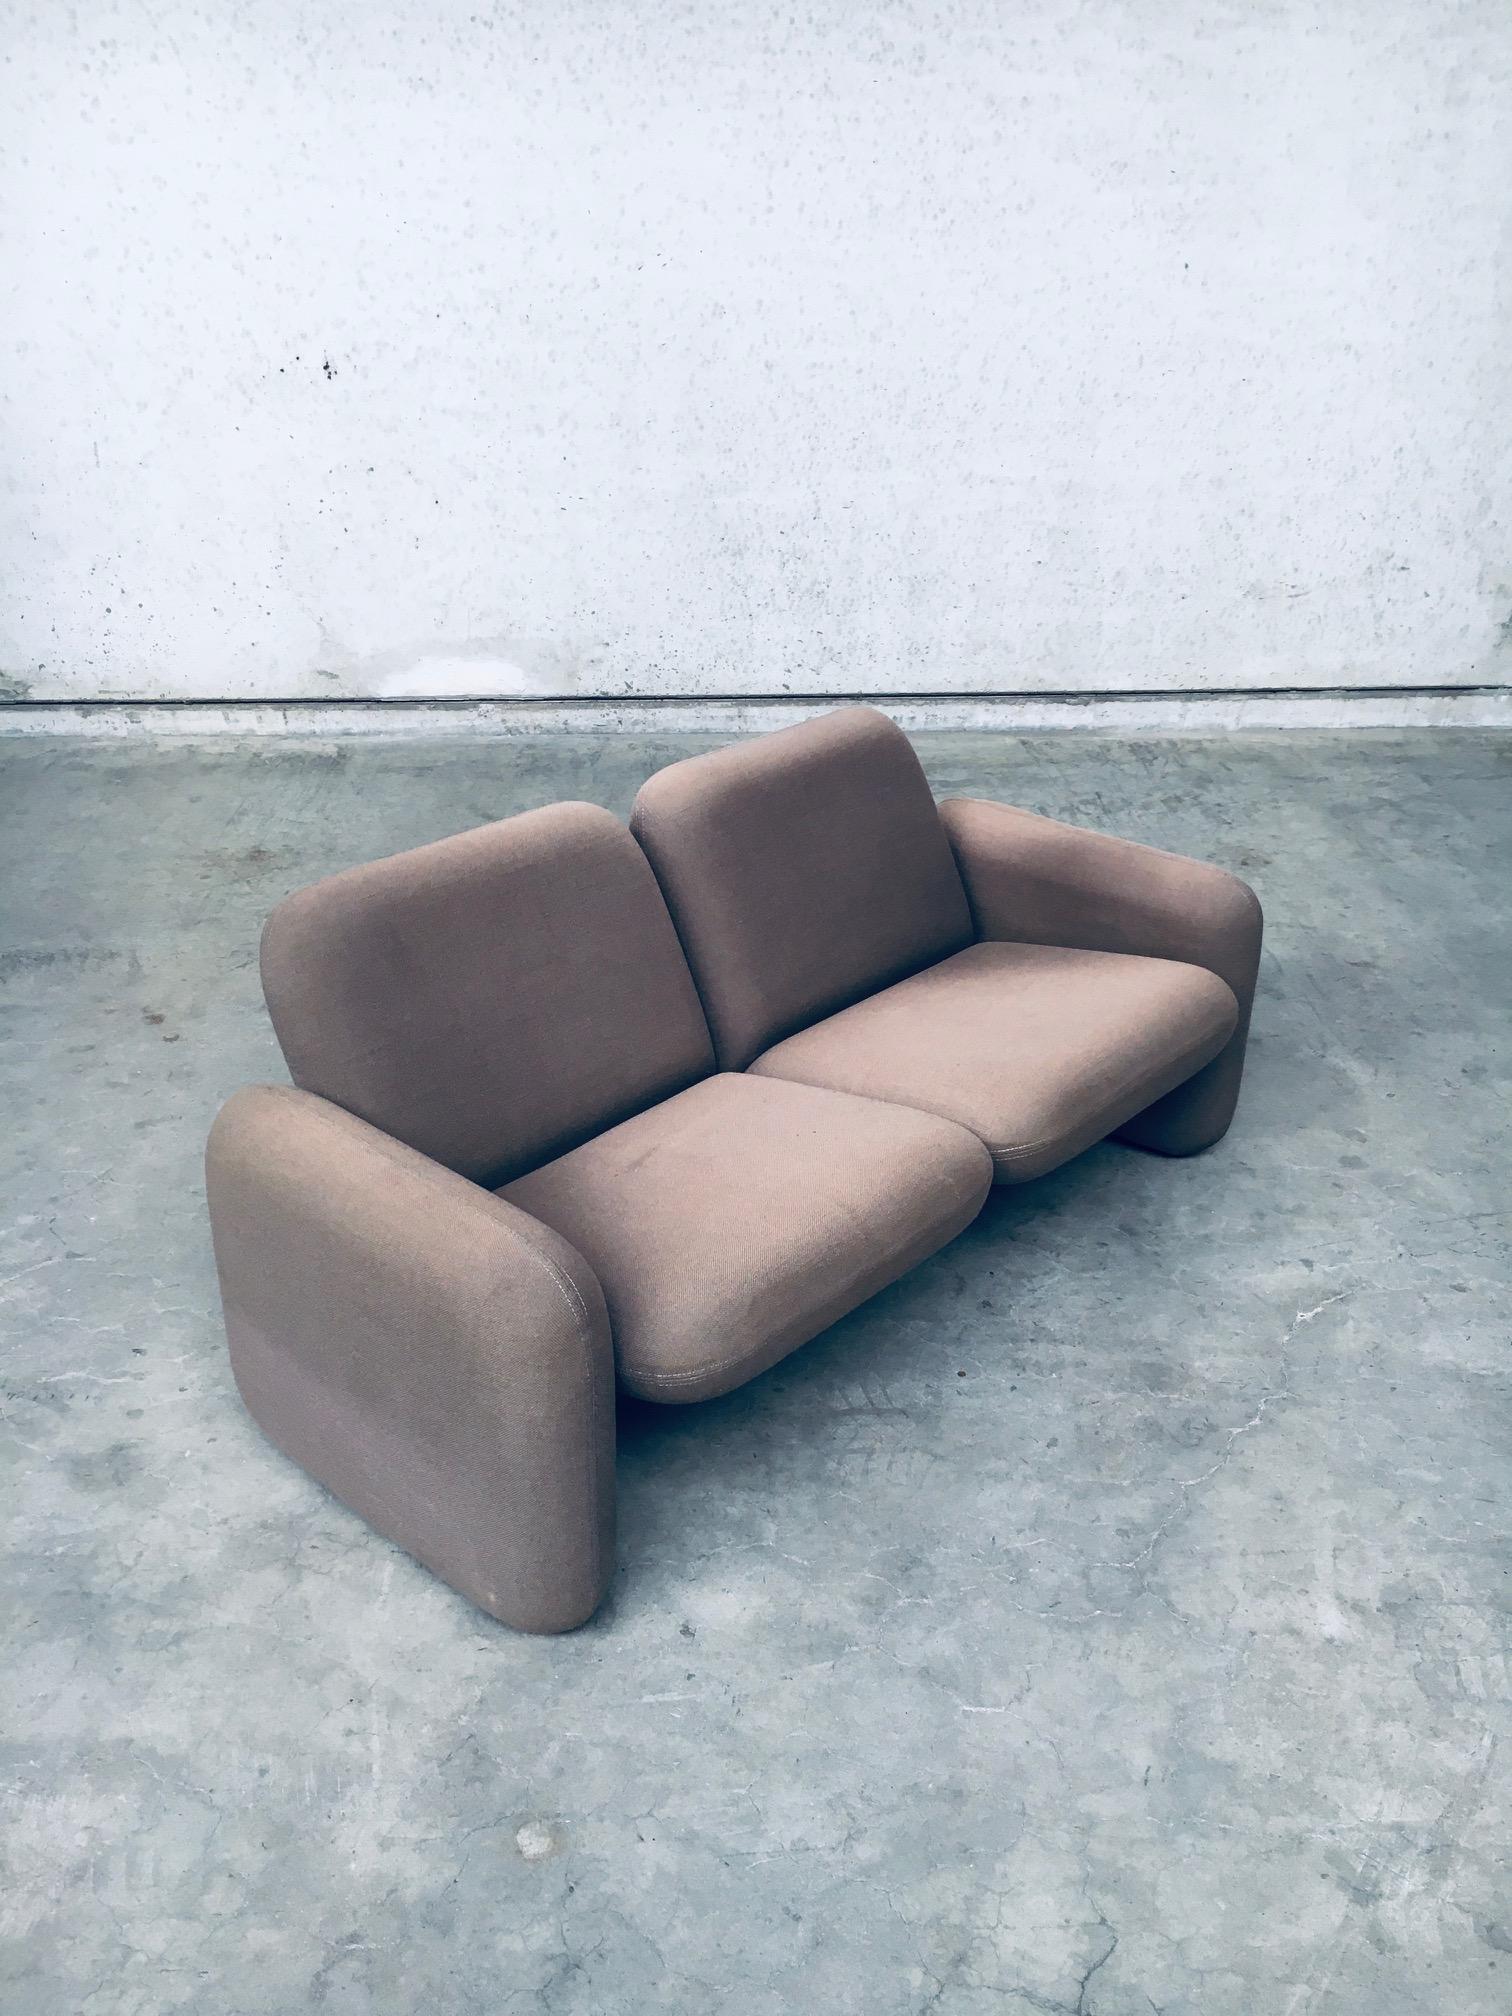 Vintage Midcentury Modern Design CHICLET Sofa by Ray Wilkes for Herman Miller. Made in the USA, late 1970's - eraly 1980's. Marked with Herman Miller label, and a possible date: 10-4-80. All original 2-seater sofa in a light brown fabric. This sofa